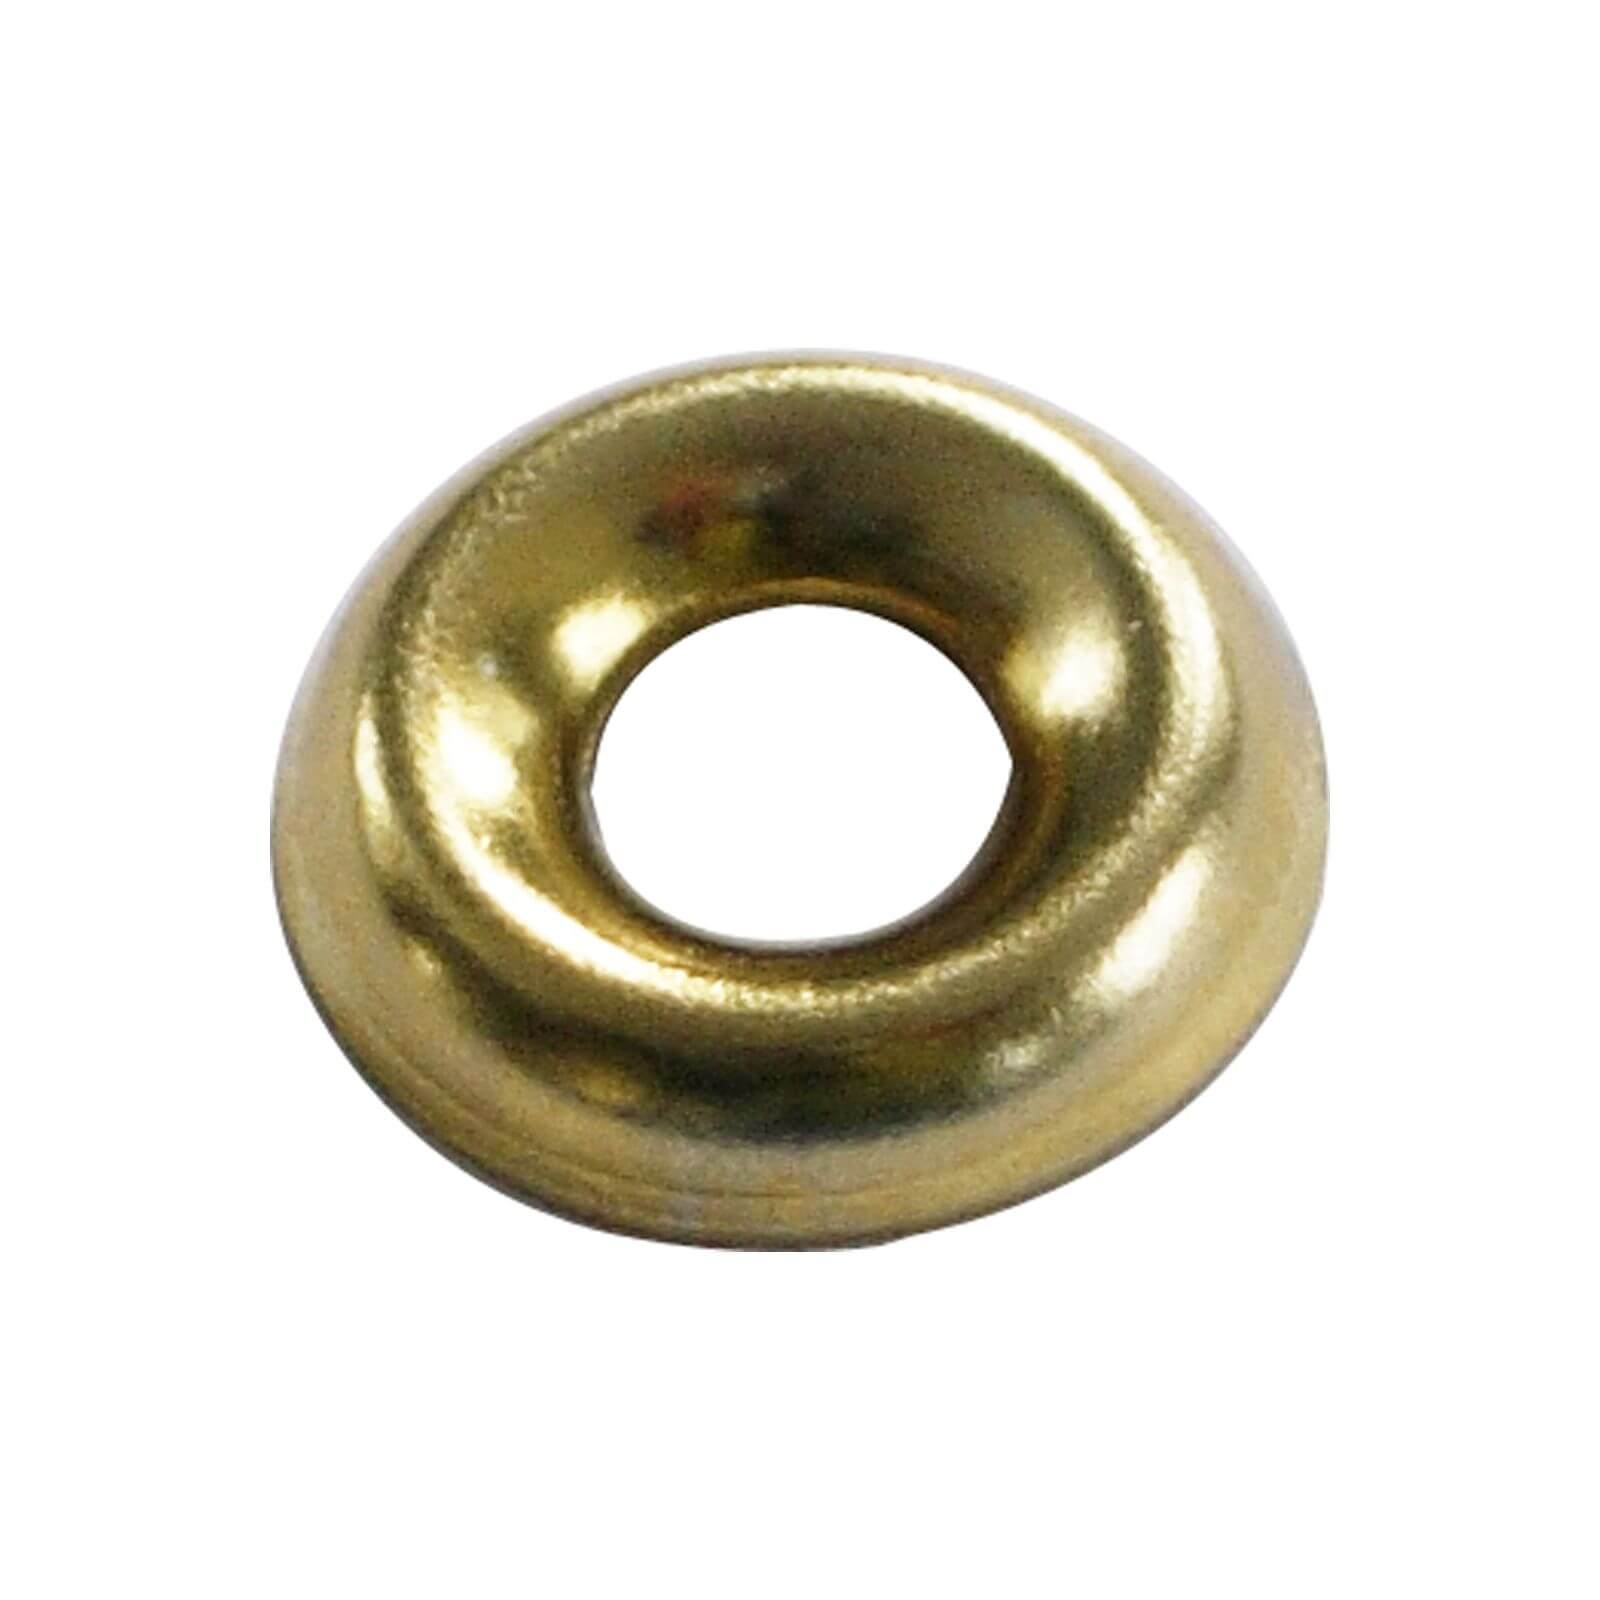 Screw Cup Washer - Brass Plated- 4mm - 20 Pack